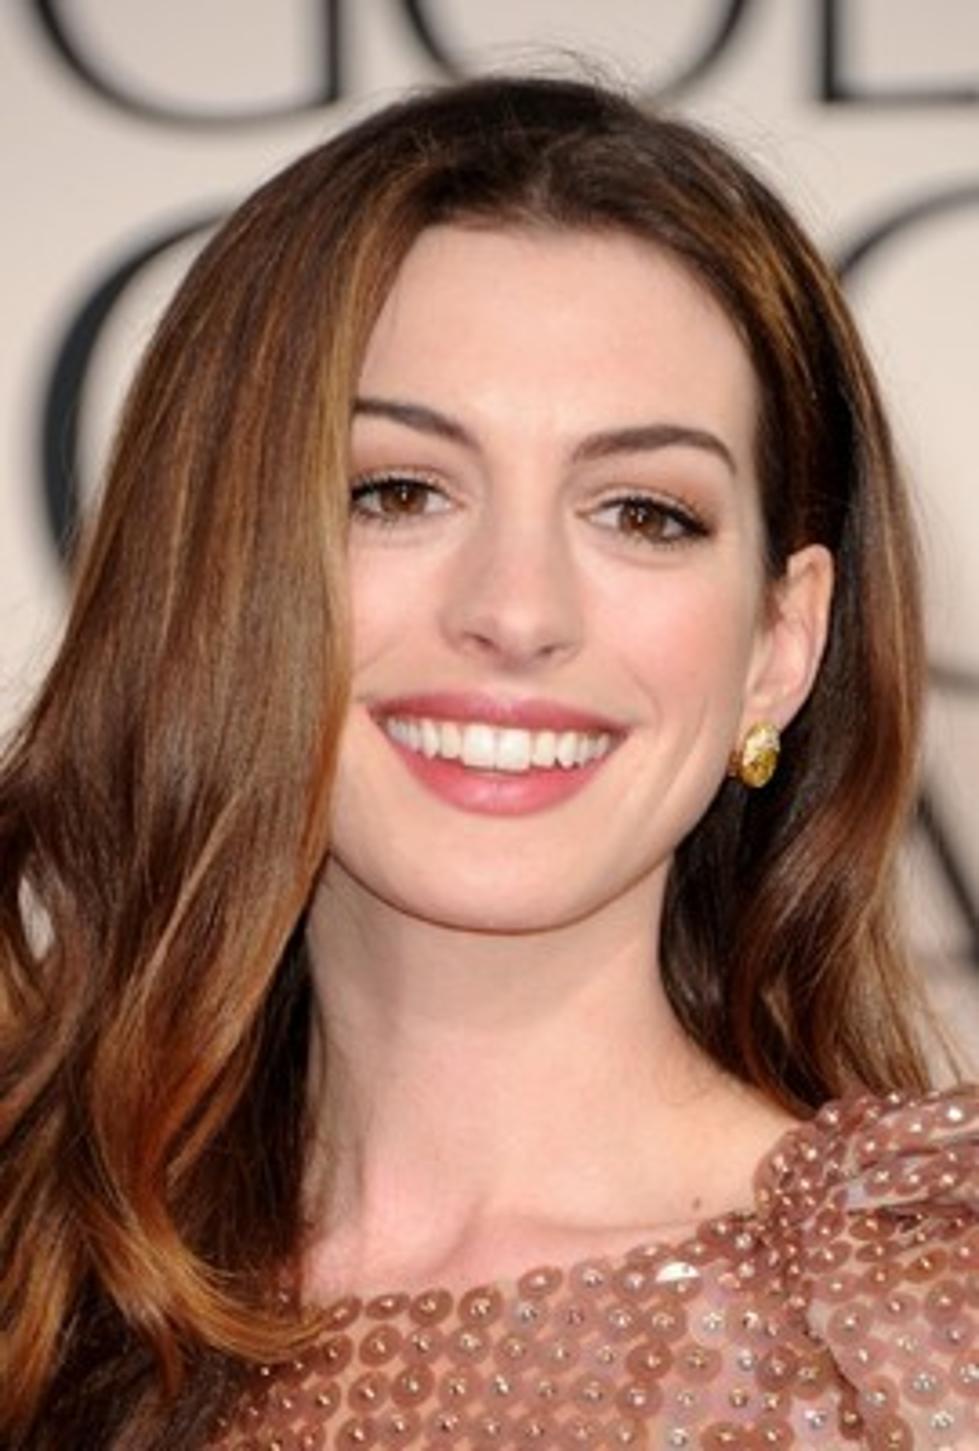 Anne Hathaway Is Latest Star Confirmed For Guest Spot On “Glee”